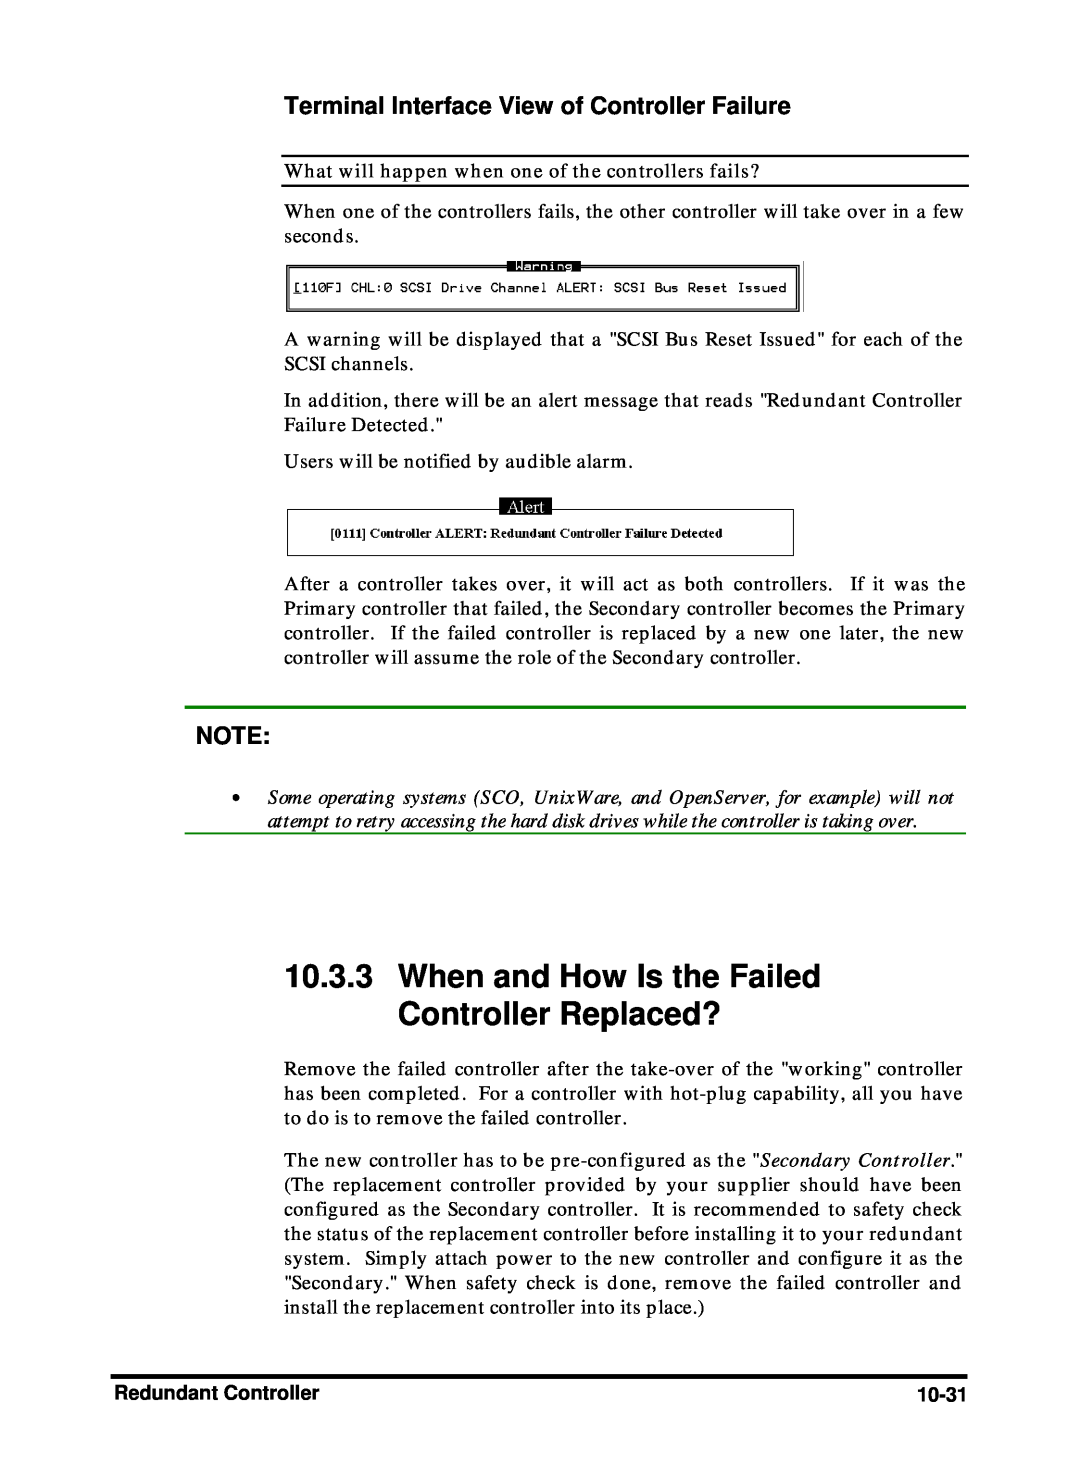 Compaq Infortrend manual When and How Is the Failed Controller Replaced?, Terminal Interface View of Controller Failure 